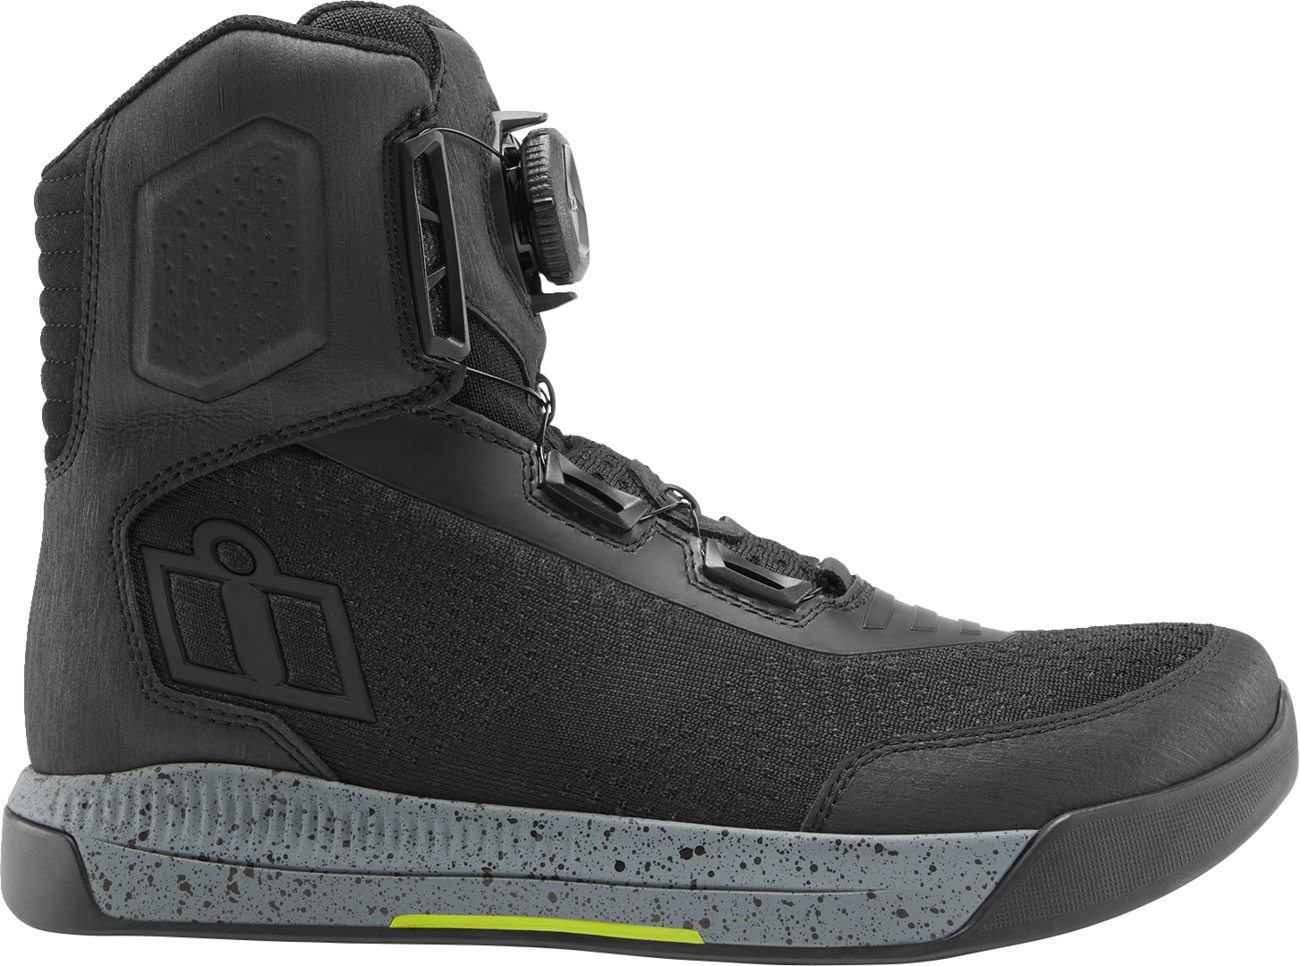 ICON Overlord™ Vented CE Boots - Black - Size 10.5 3403-1262